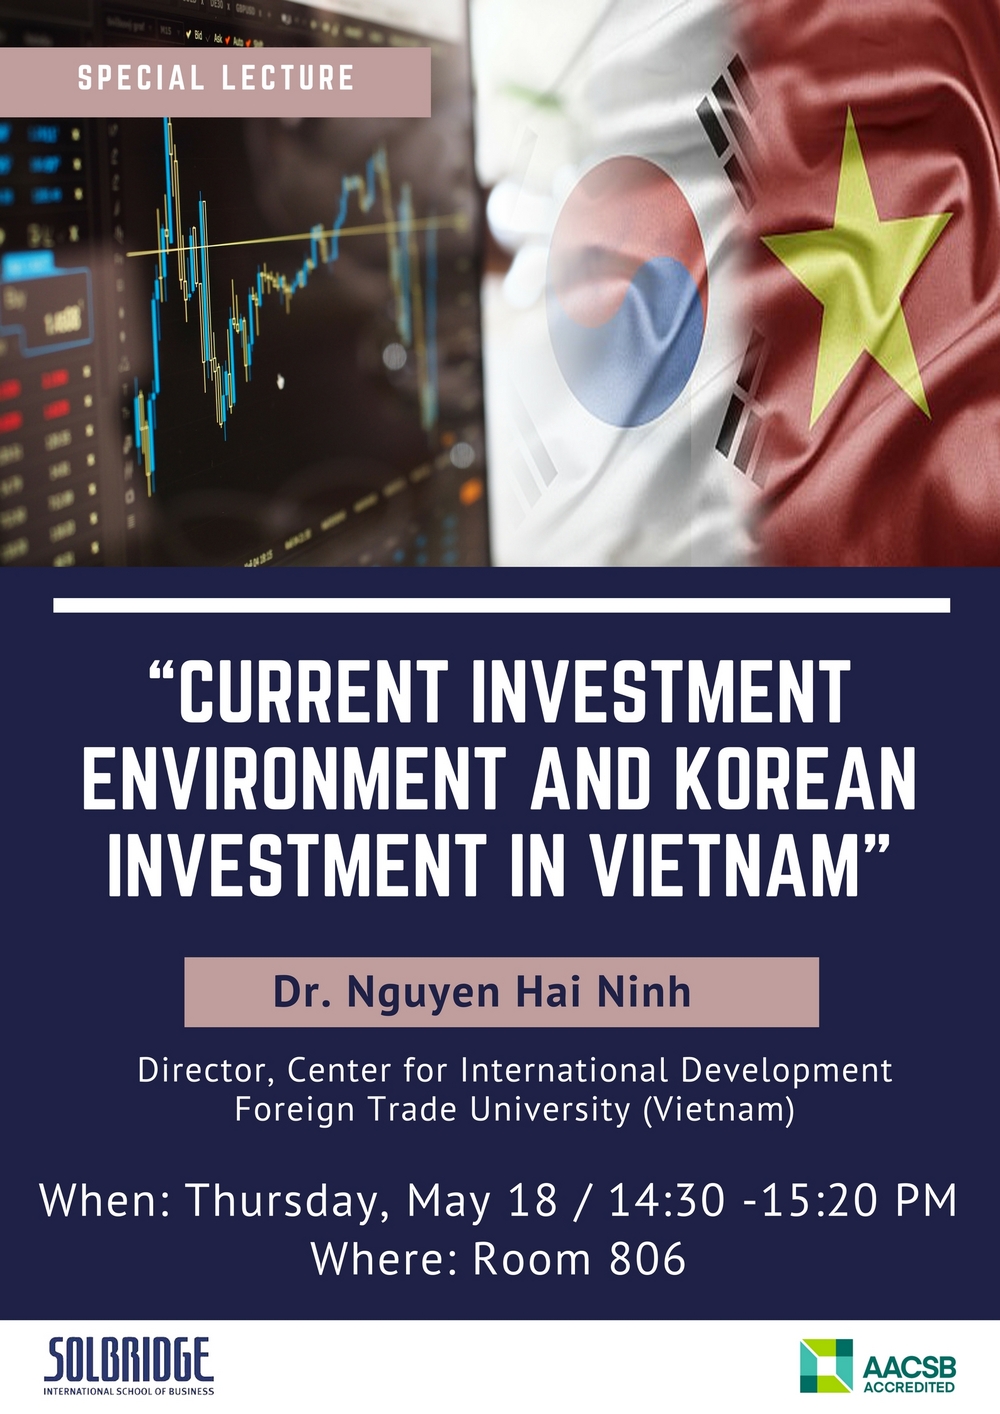 Special Lecture: Current Investment Environment and Korean Investment in Vietnam